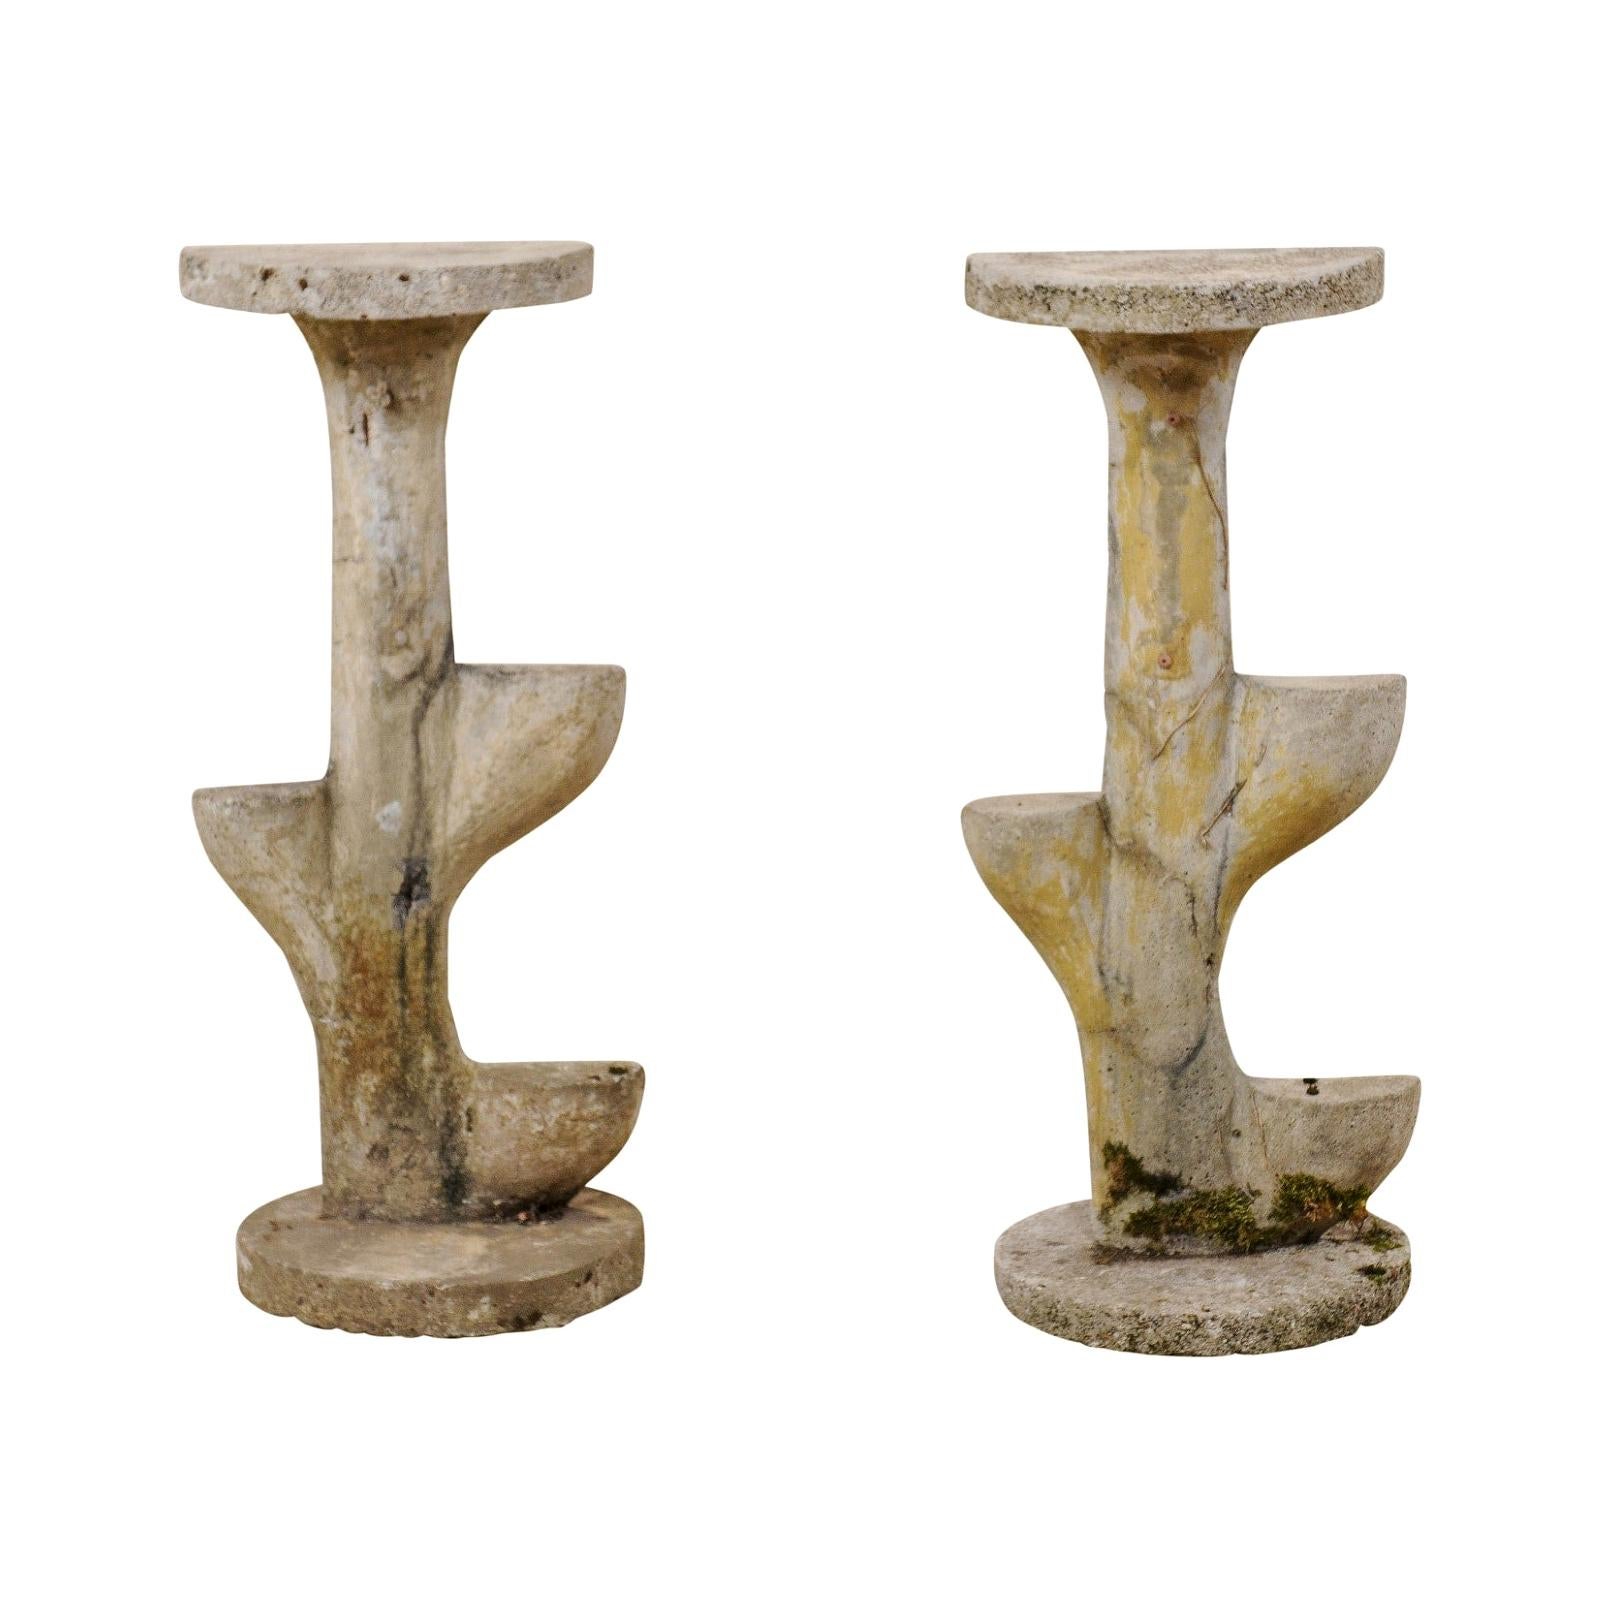 Pair of French Garden Sculptural Accents, Mid-20th Century